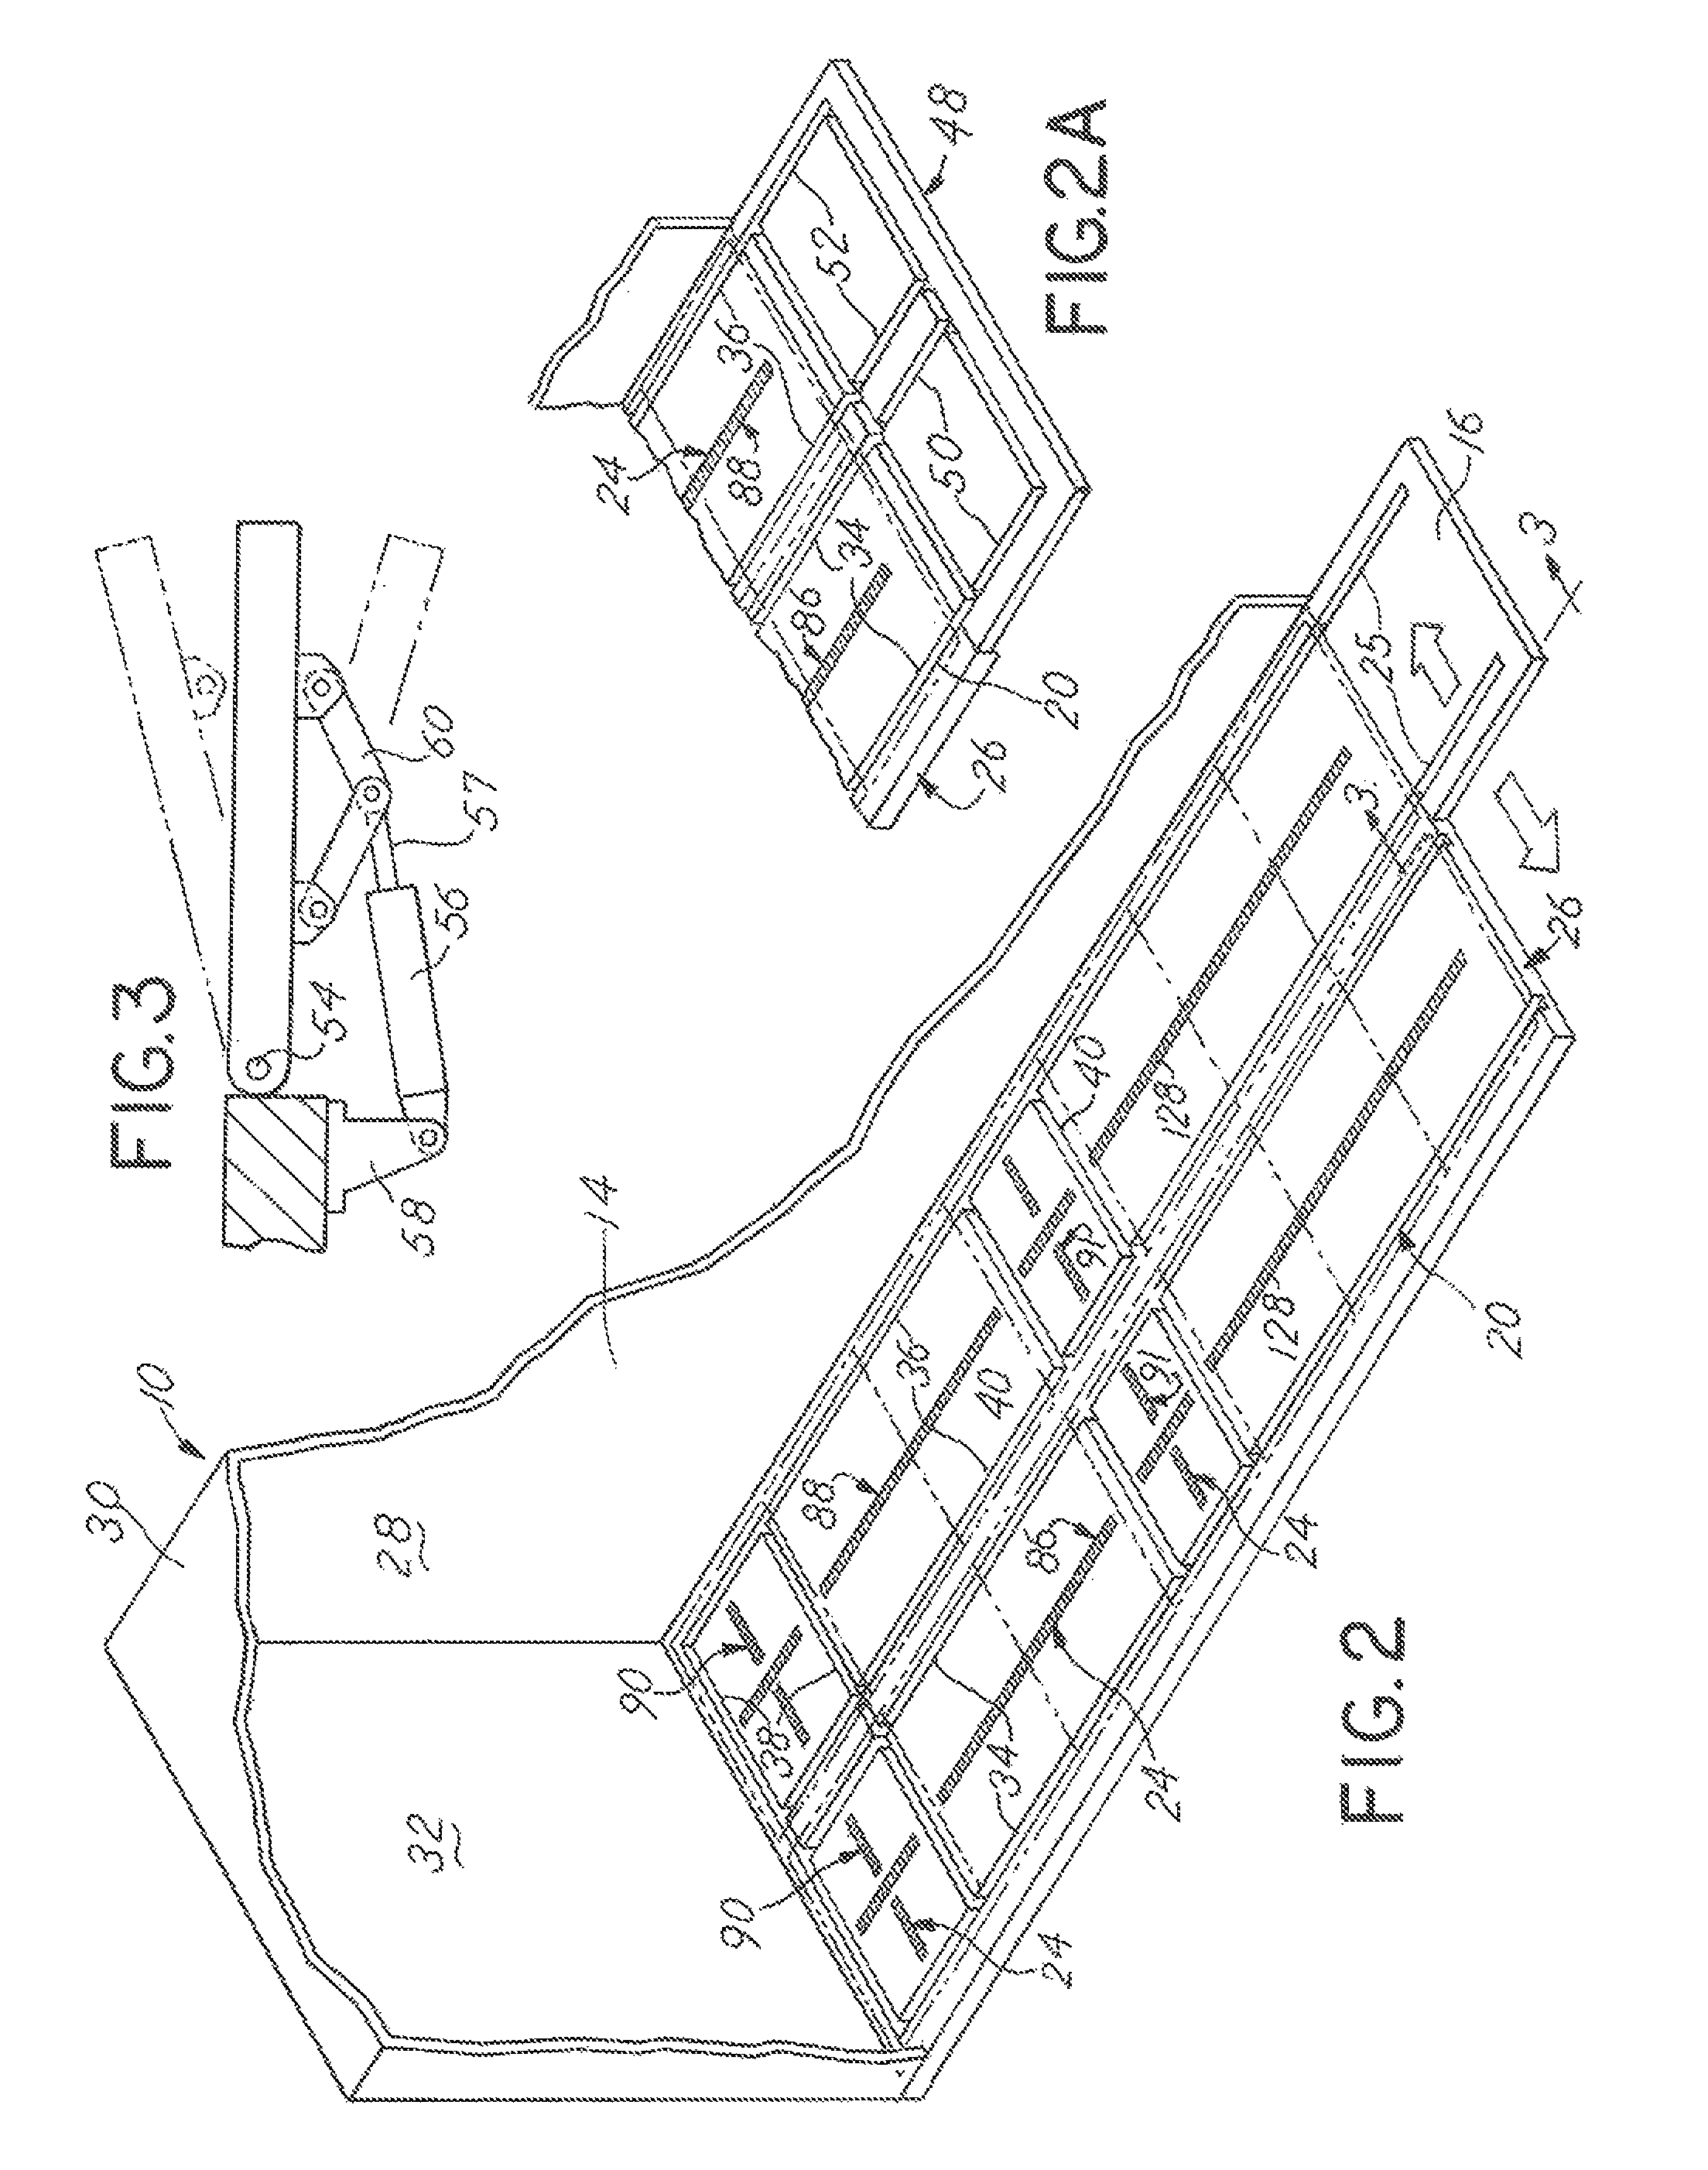 Apparatus and system for facilitating loading and unloading cargo from cargo spaces of vehicles